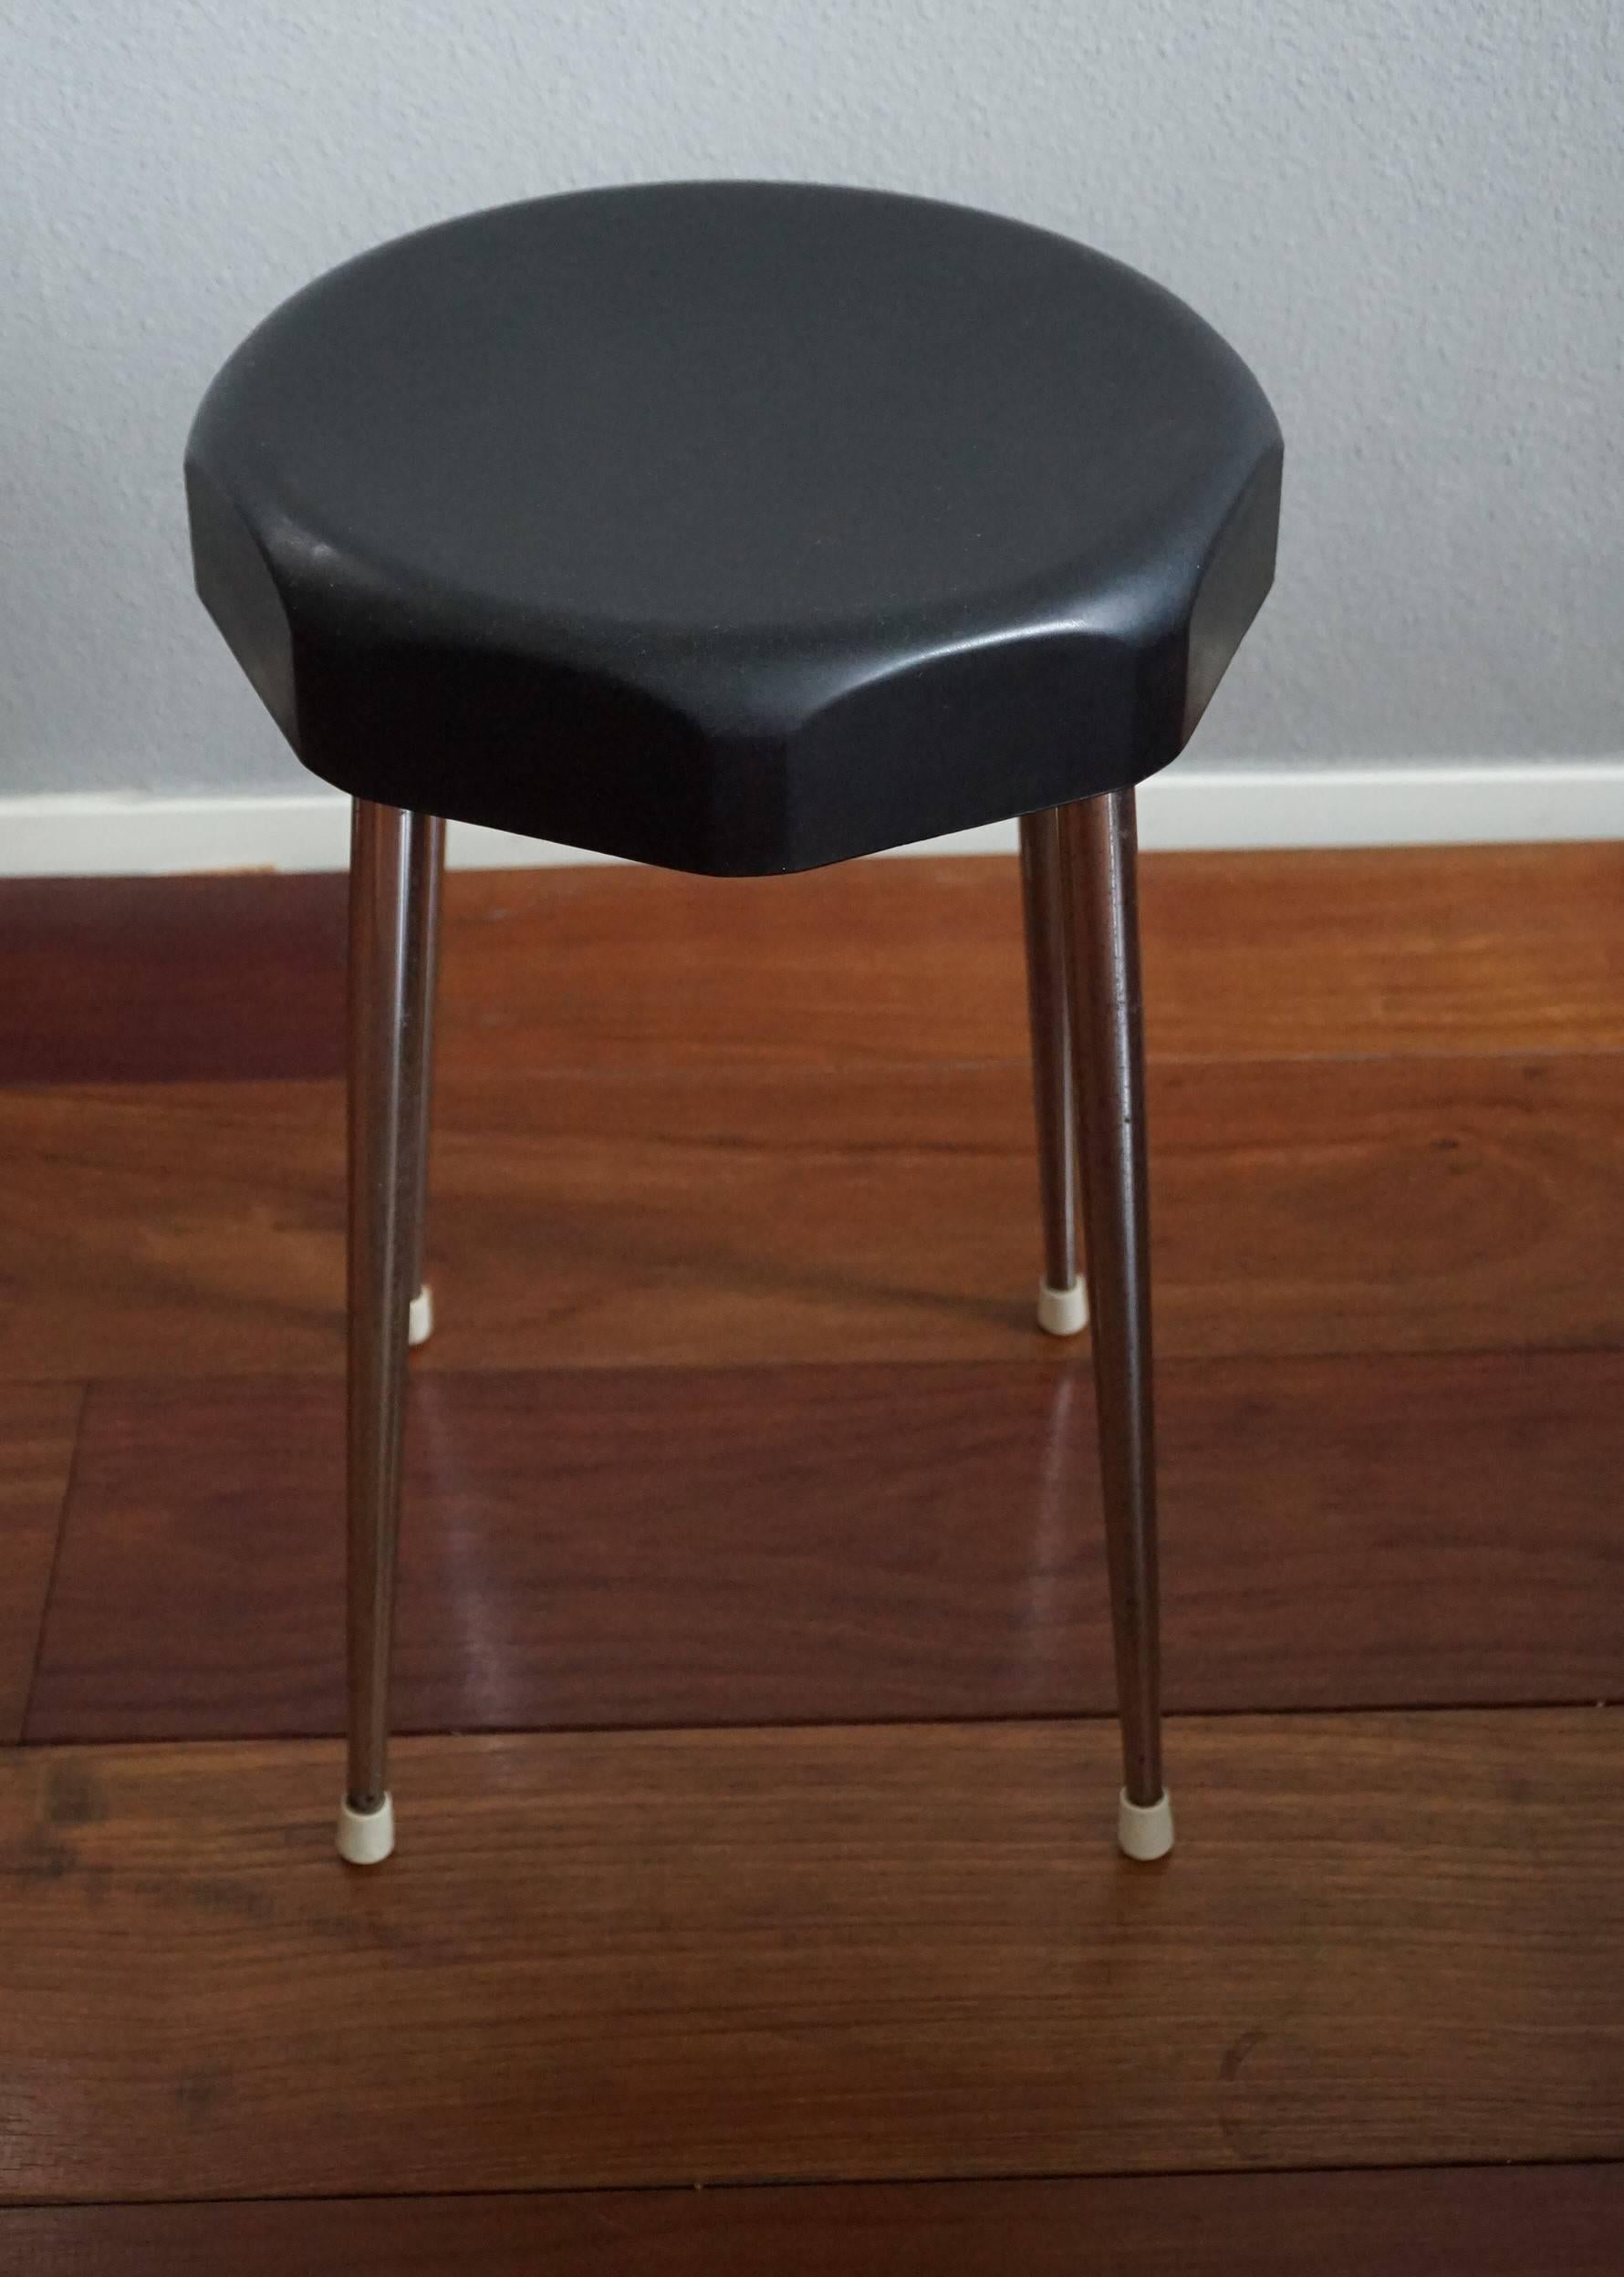 Rare and stylish 1960s stool.

We'd be lying if we said we knew much about Mid-Century Modern furniture, but we have been around long enough to know that this is a rare and amazing condition 1960s stool. The combination of the beautifully shaped,